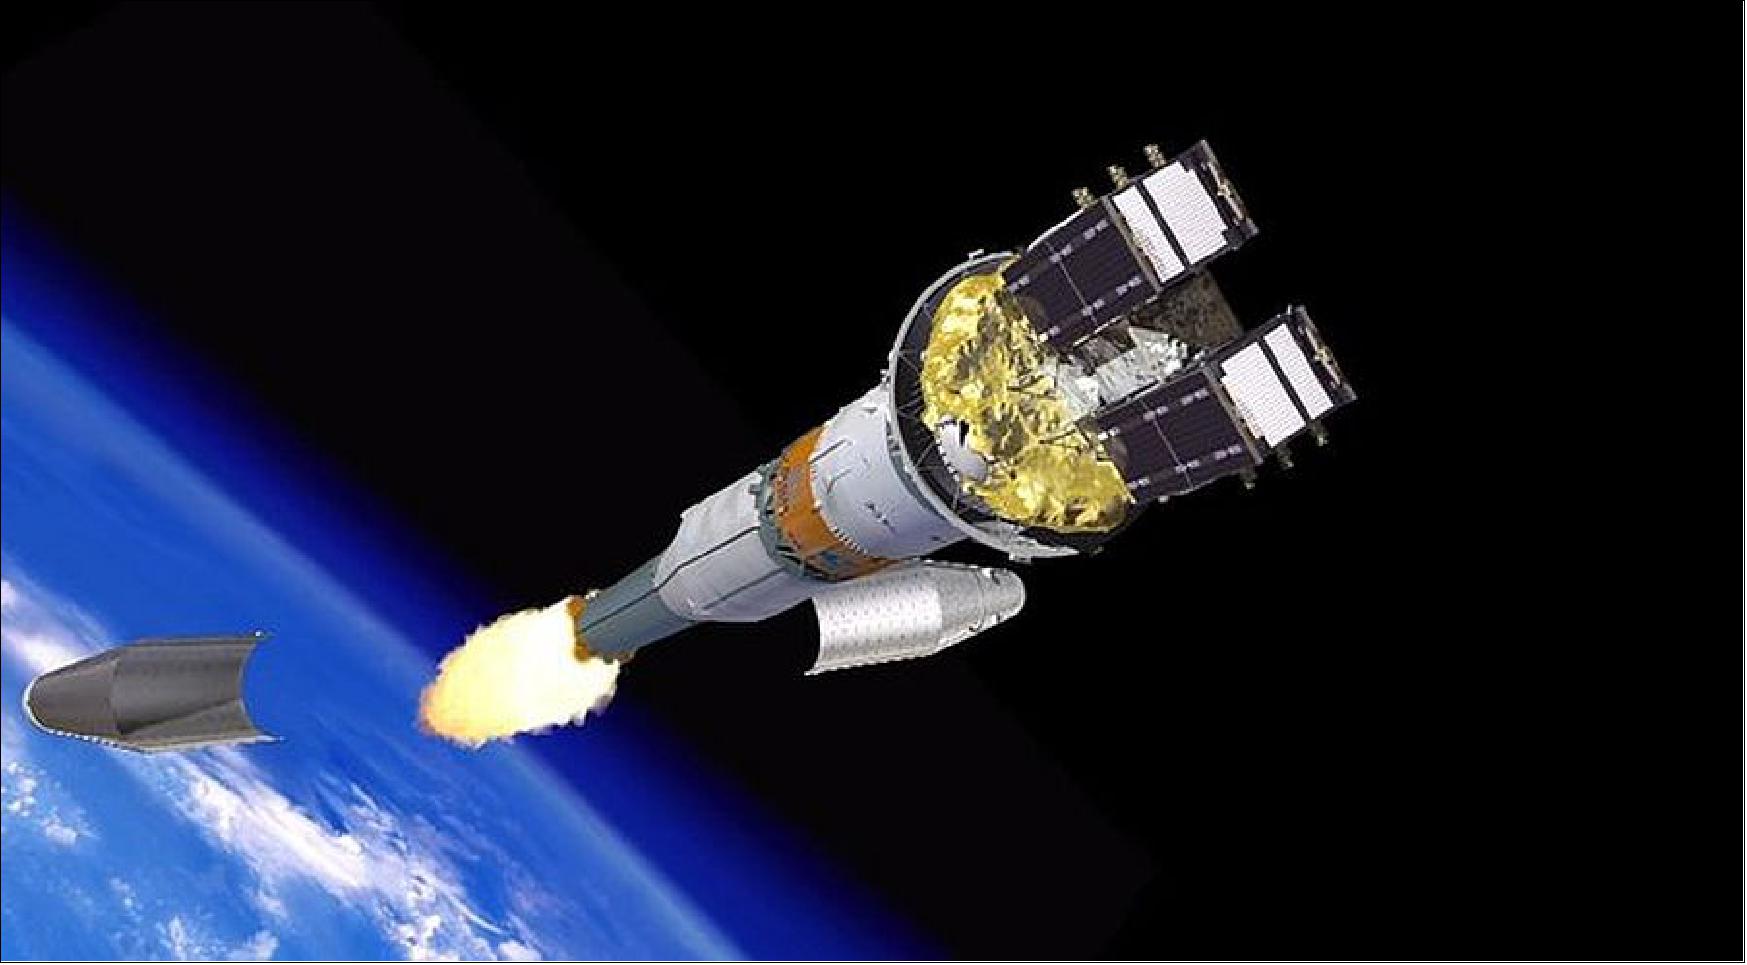 Figure 23: Artist's view of the protective launcher fairing which jettisoned at 3 min 29 sec after launch, revealing the two Galileo satellites attached to their dispenser atop the Fregat upper stage (image credit: Arianespace, ESA)